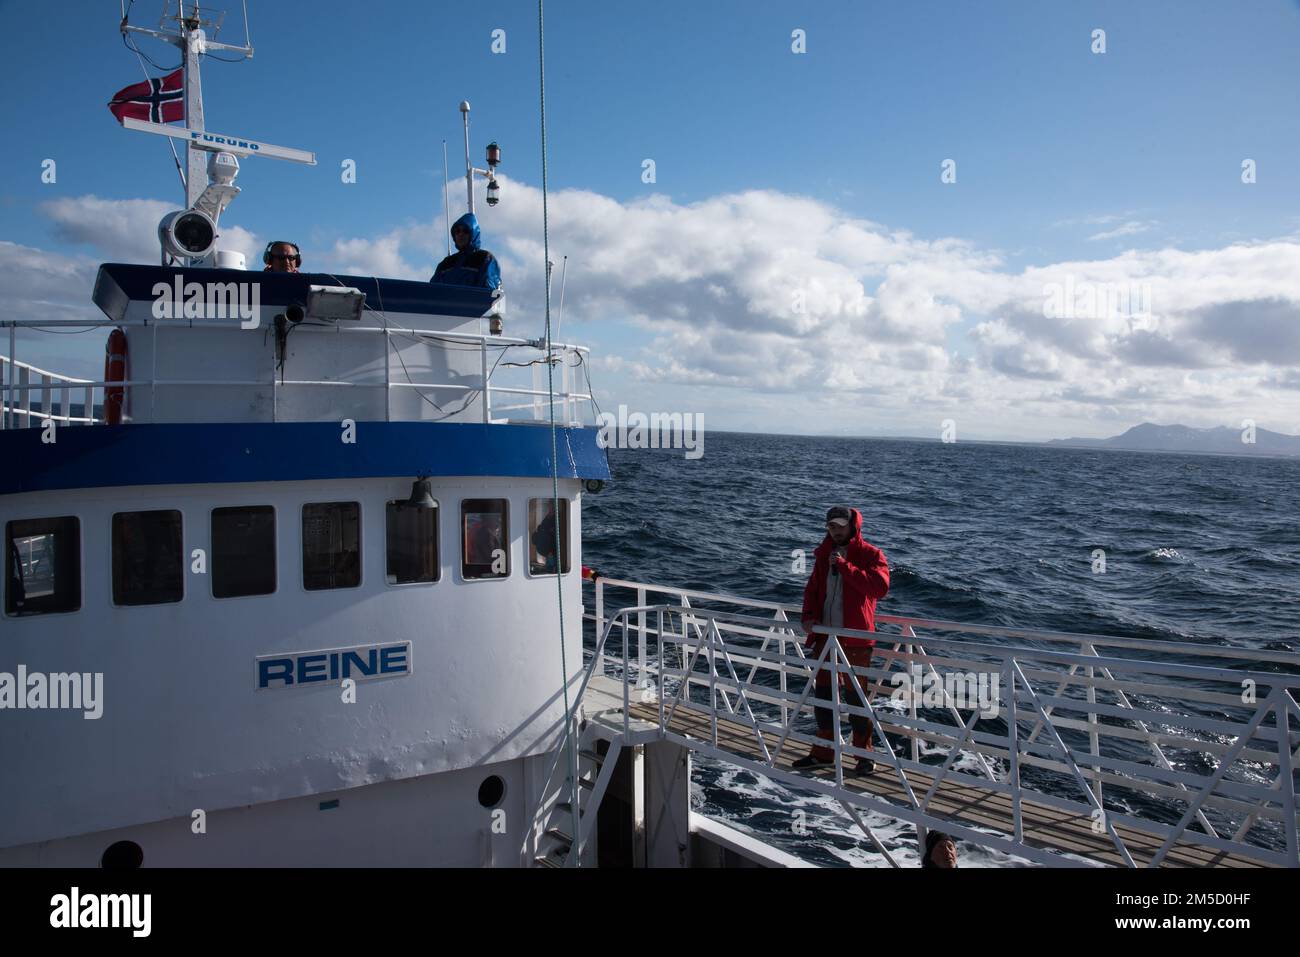 Former whaler Reina is nowadays starting for whale watching from Andenes in den very north of Andøya island in the Vesterålen archipelago. Stock Photo